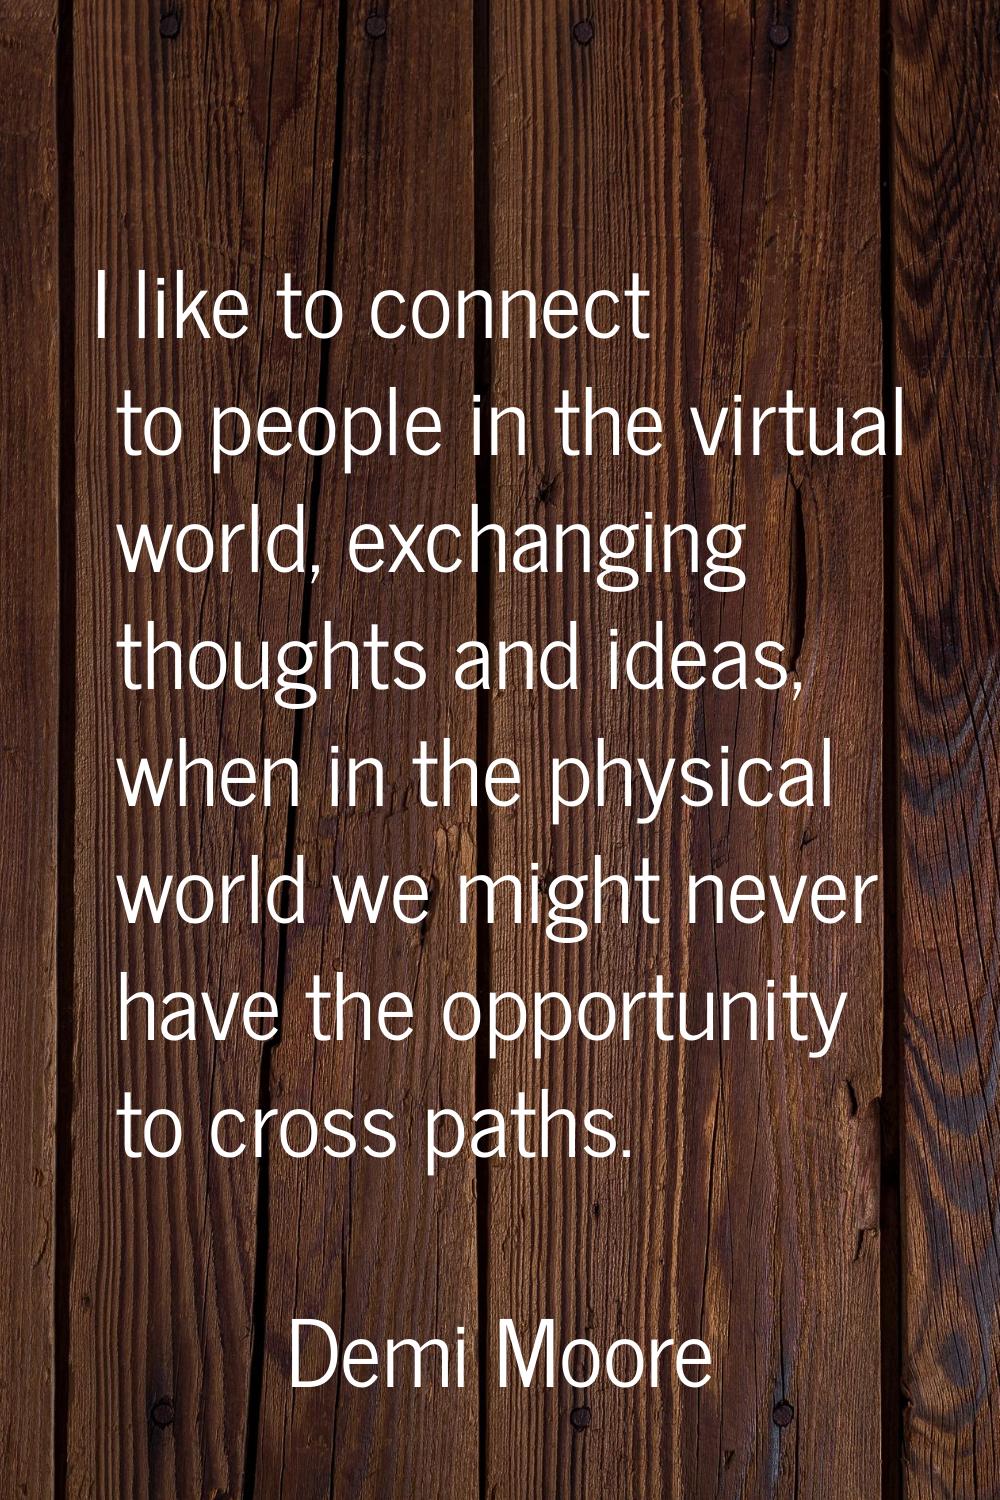 I like to connect to people in the virtual world, exchanging thoughts and ideas, when in the physic